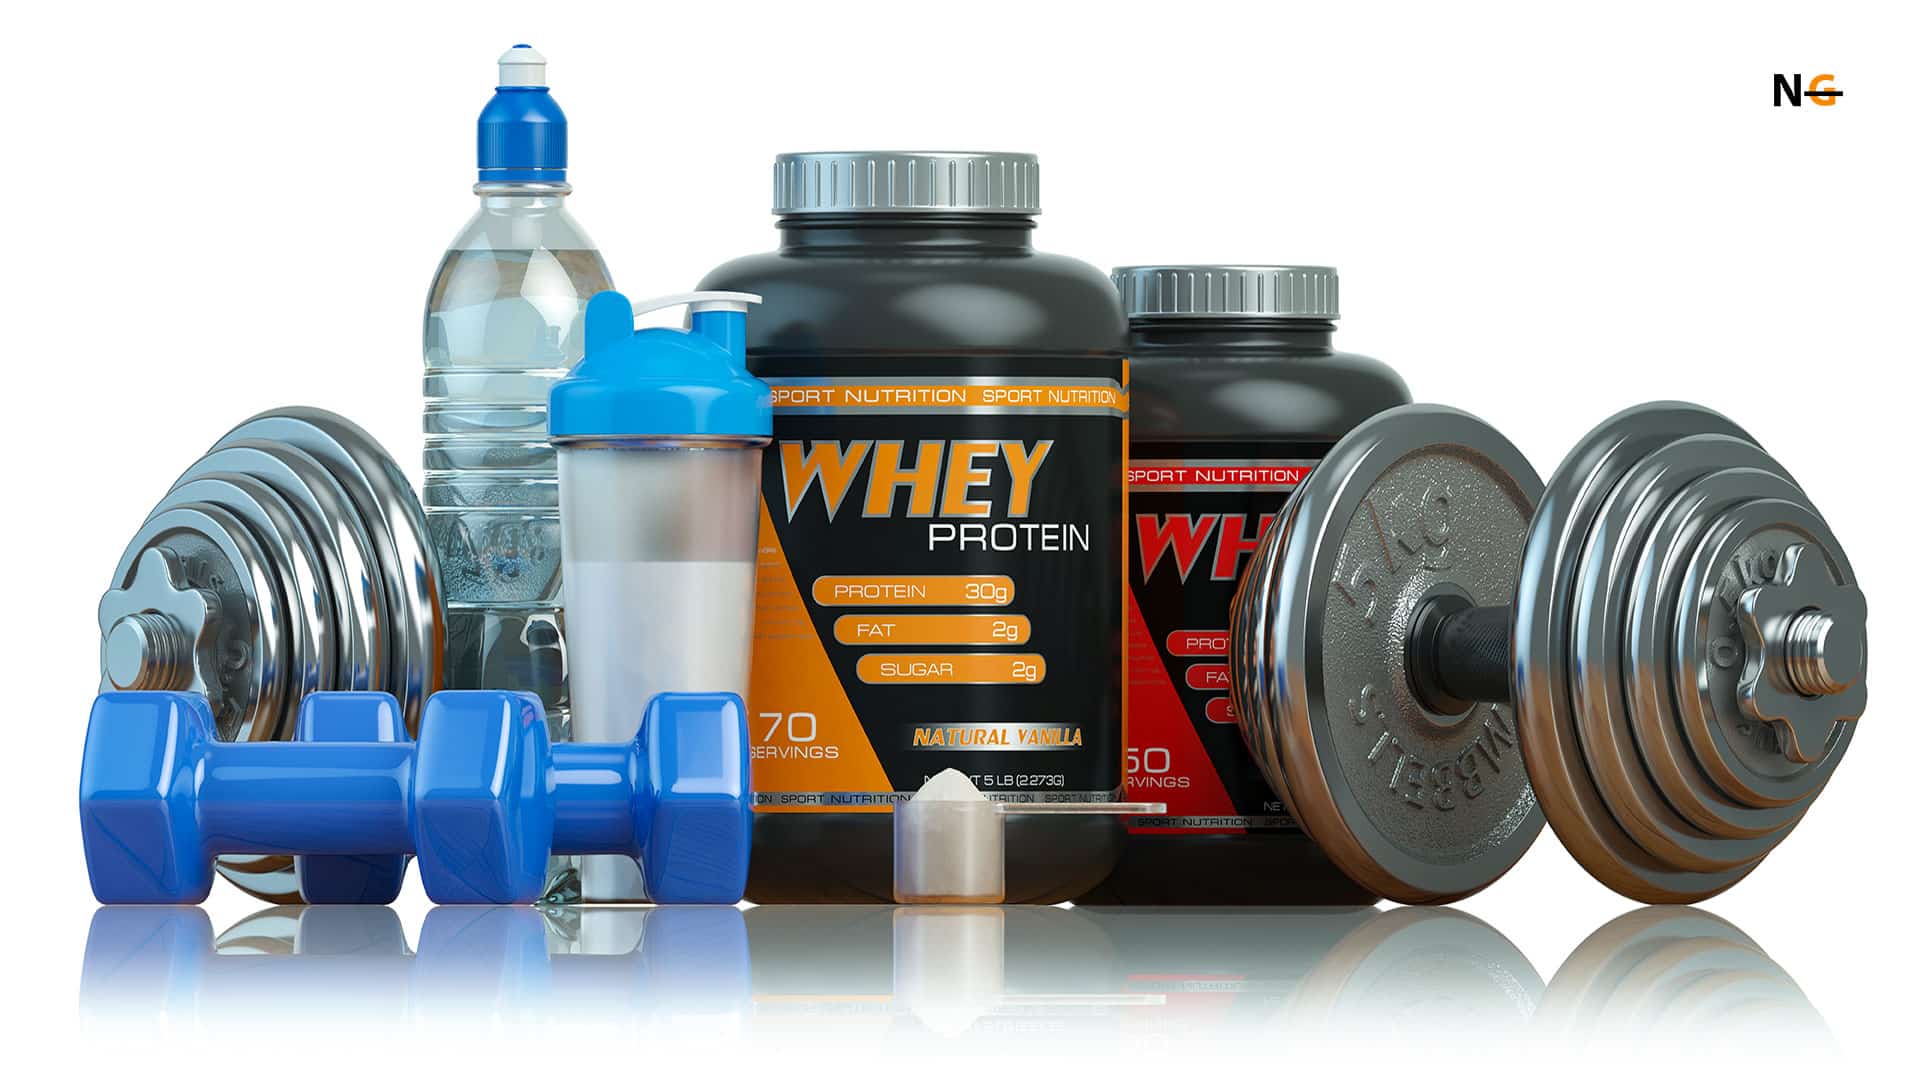 Types of protein powders and their gluten status